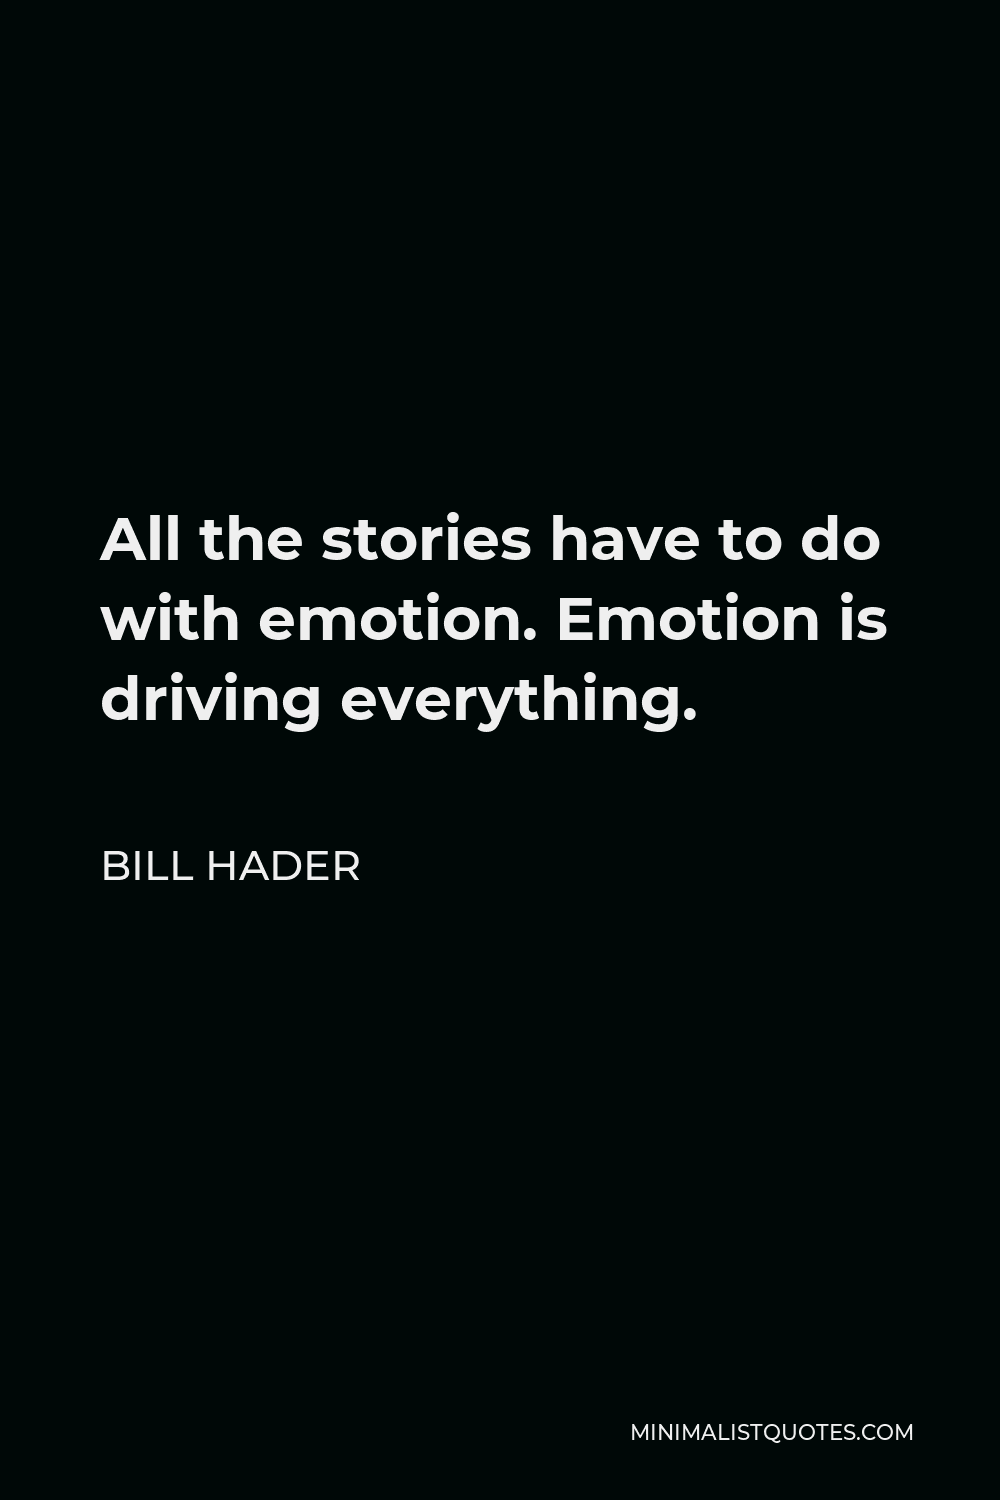 Bill Hader Quote - All the stories have to do with emotion. Emotion is driving everything.